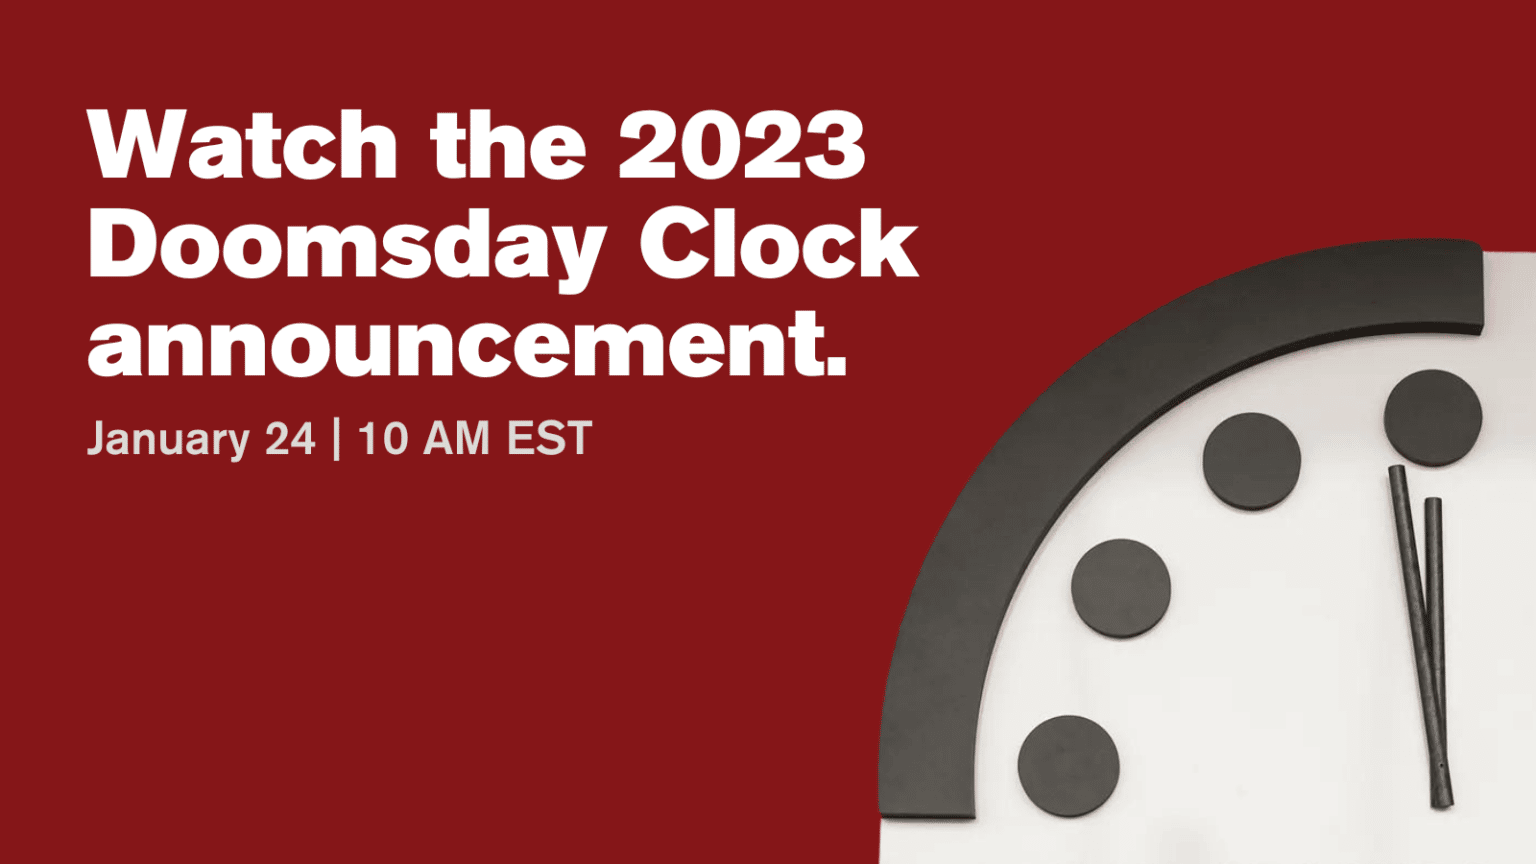 Watch the 2023 Doomsday Clock announcement on Jan. 24 Bulletin of the